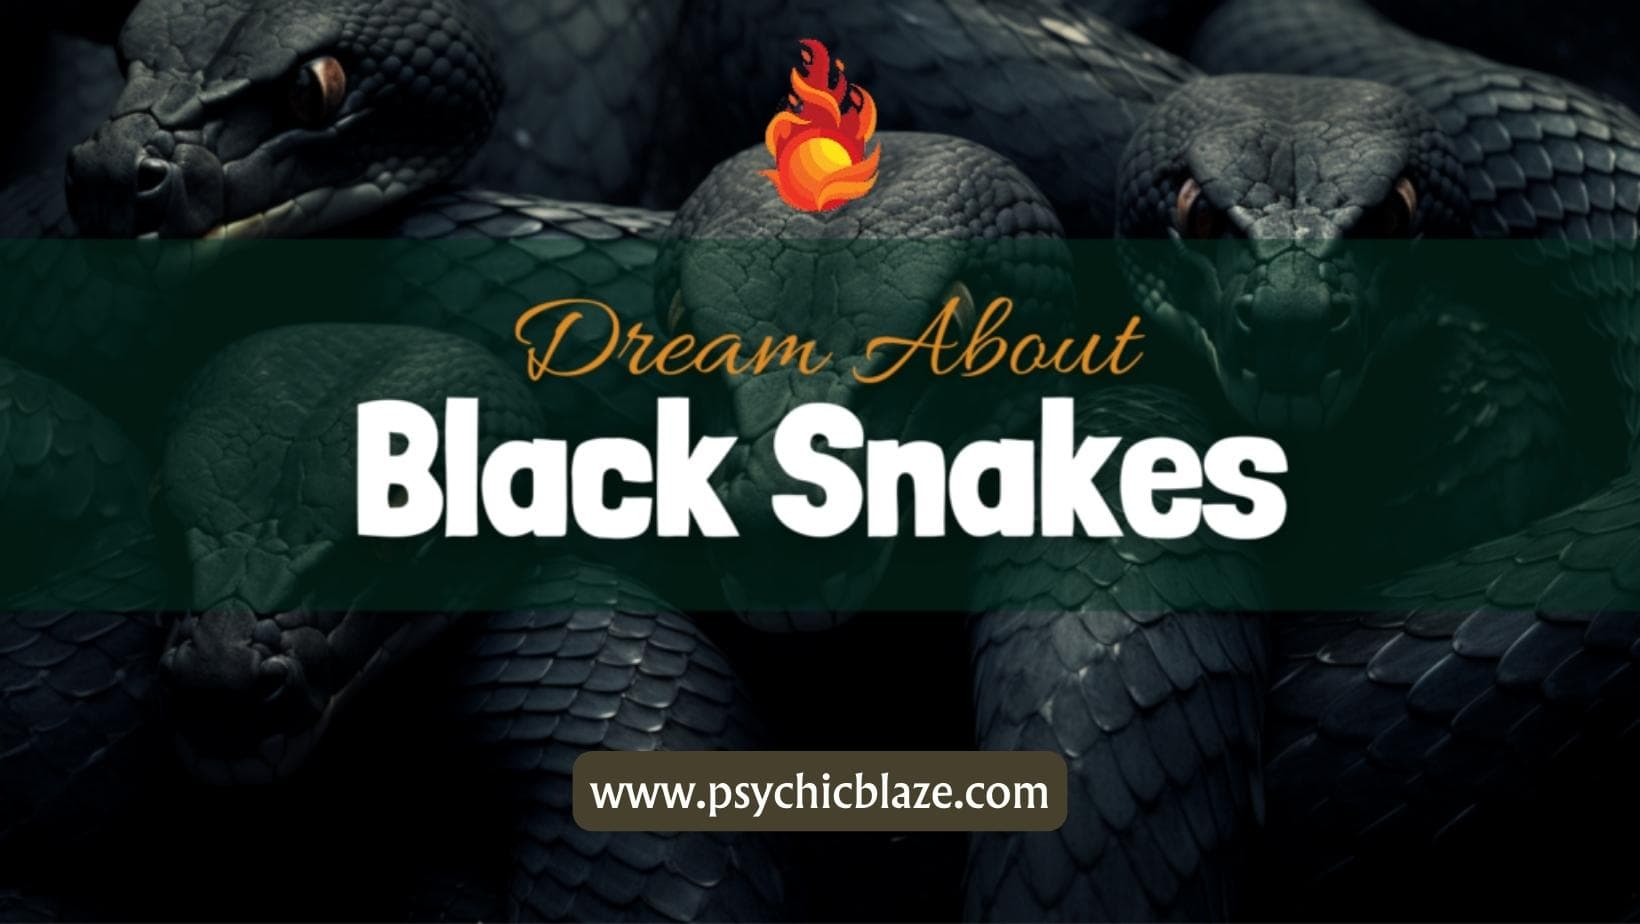 Dream about Black Snakes